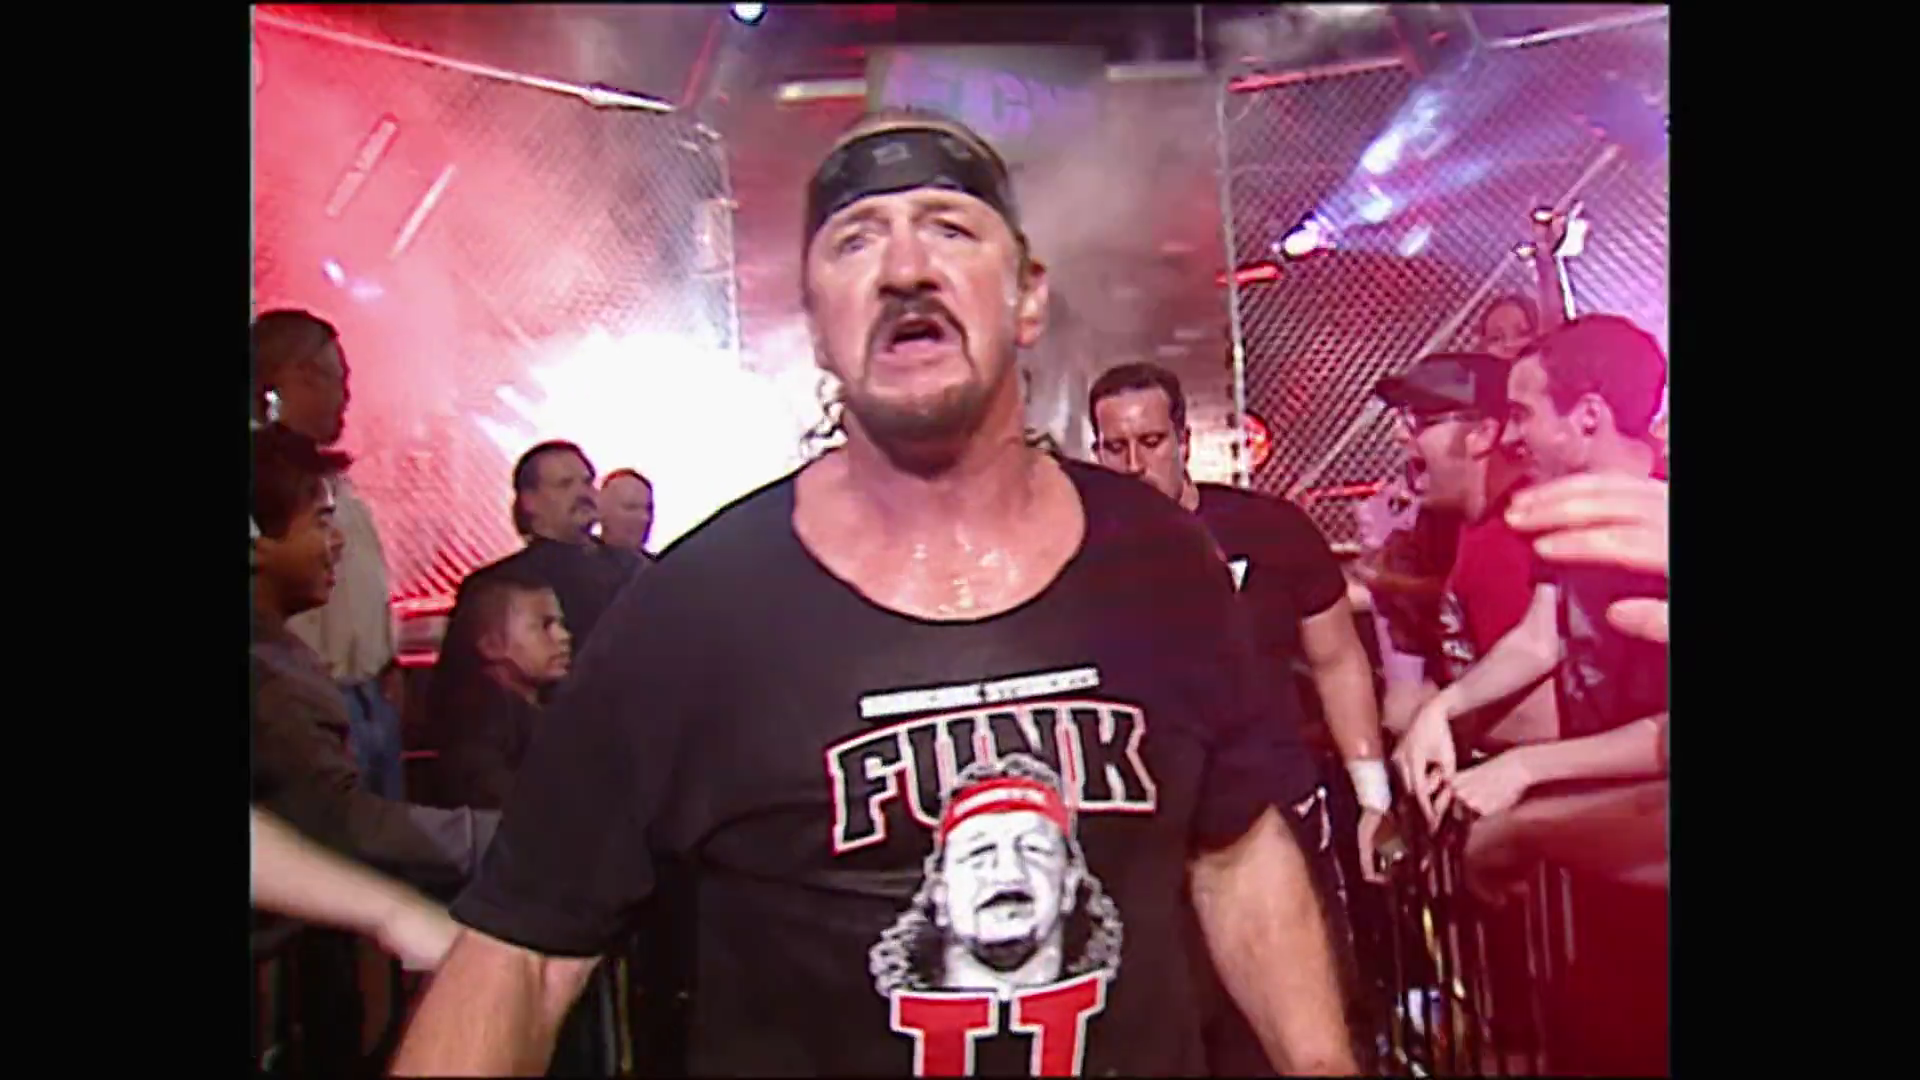 Terry Funk’s WWE Debut Actually Took Place In 1971